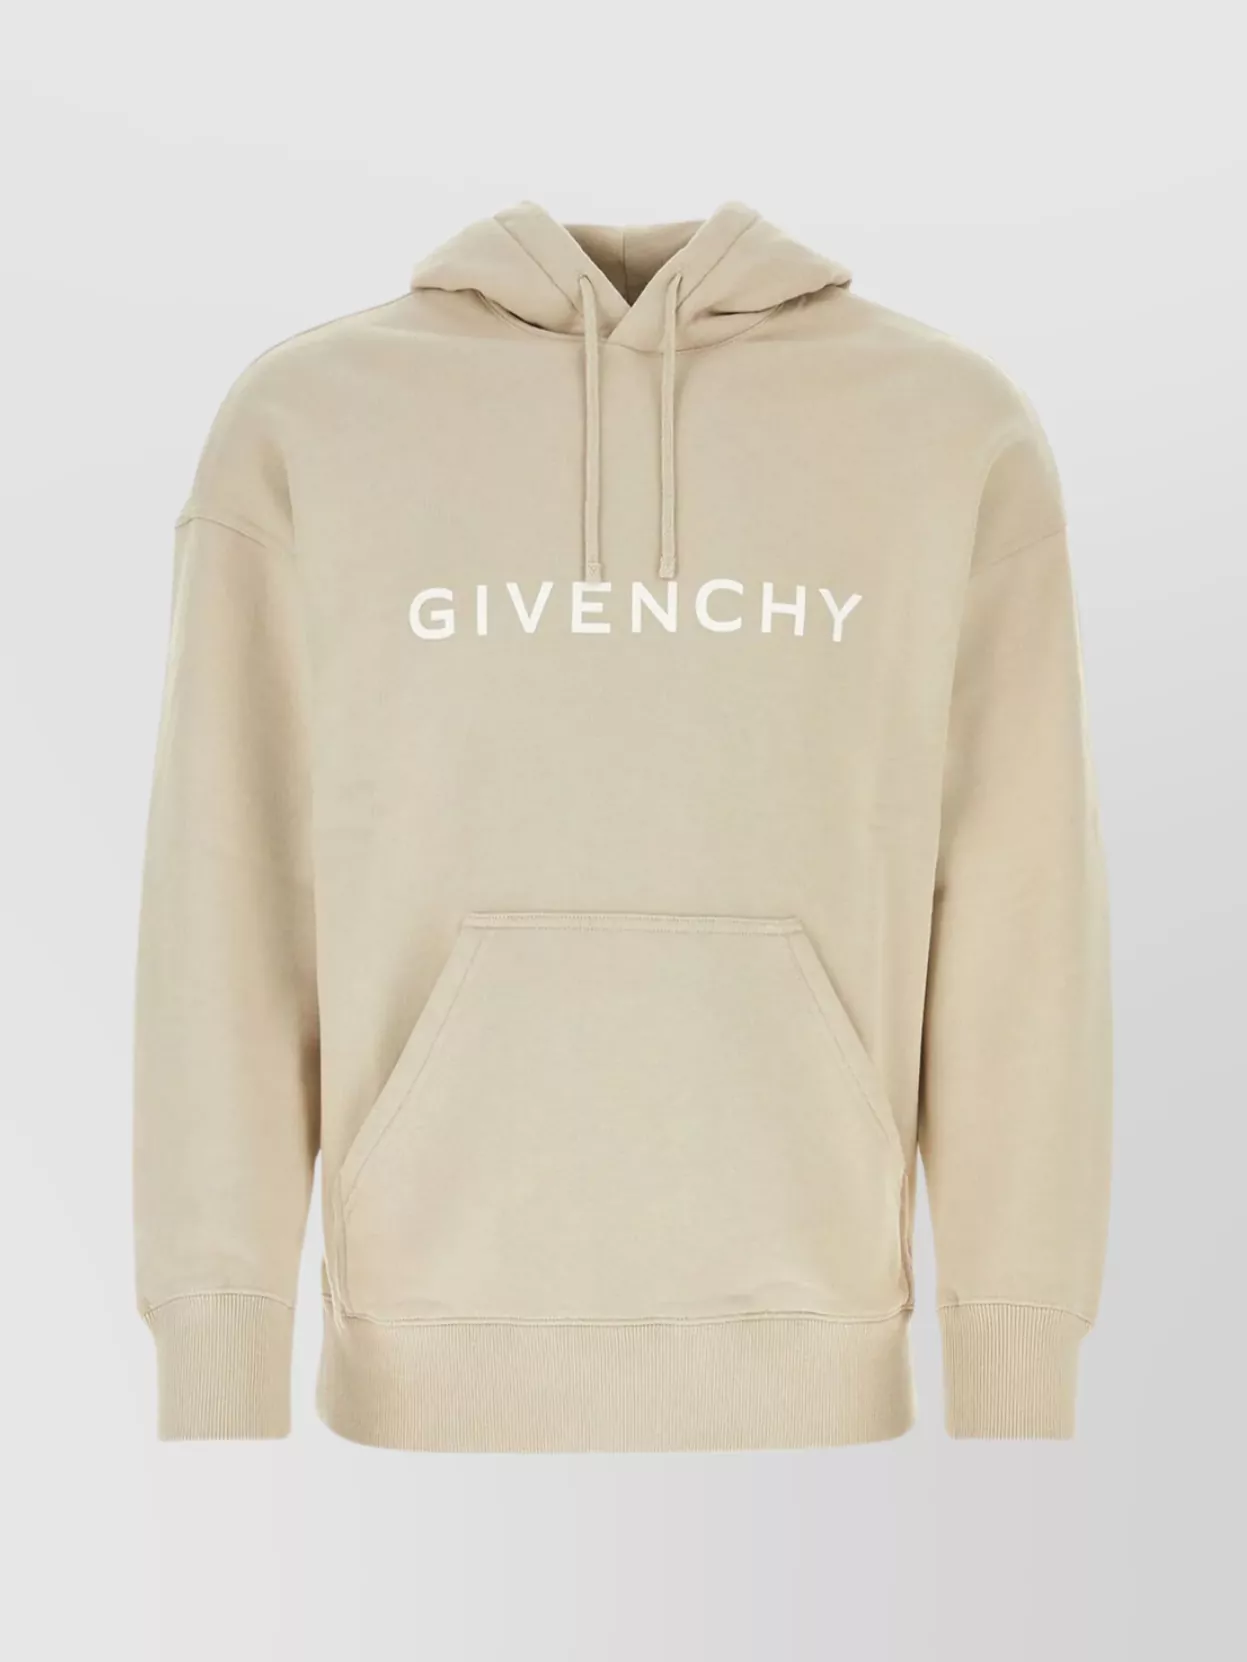 Givenchy Cotton Drawstring Hooded Sweatshirt In Neutral